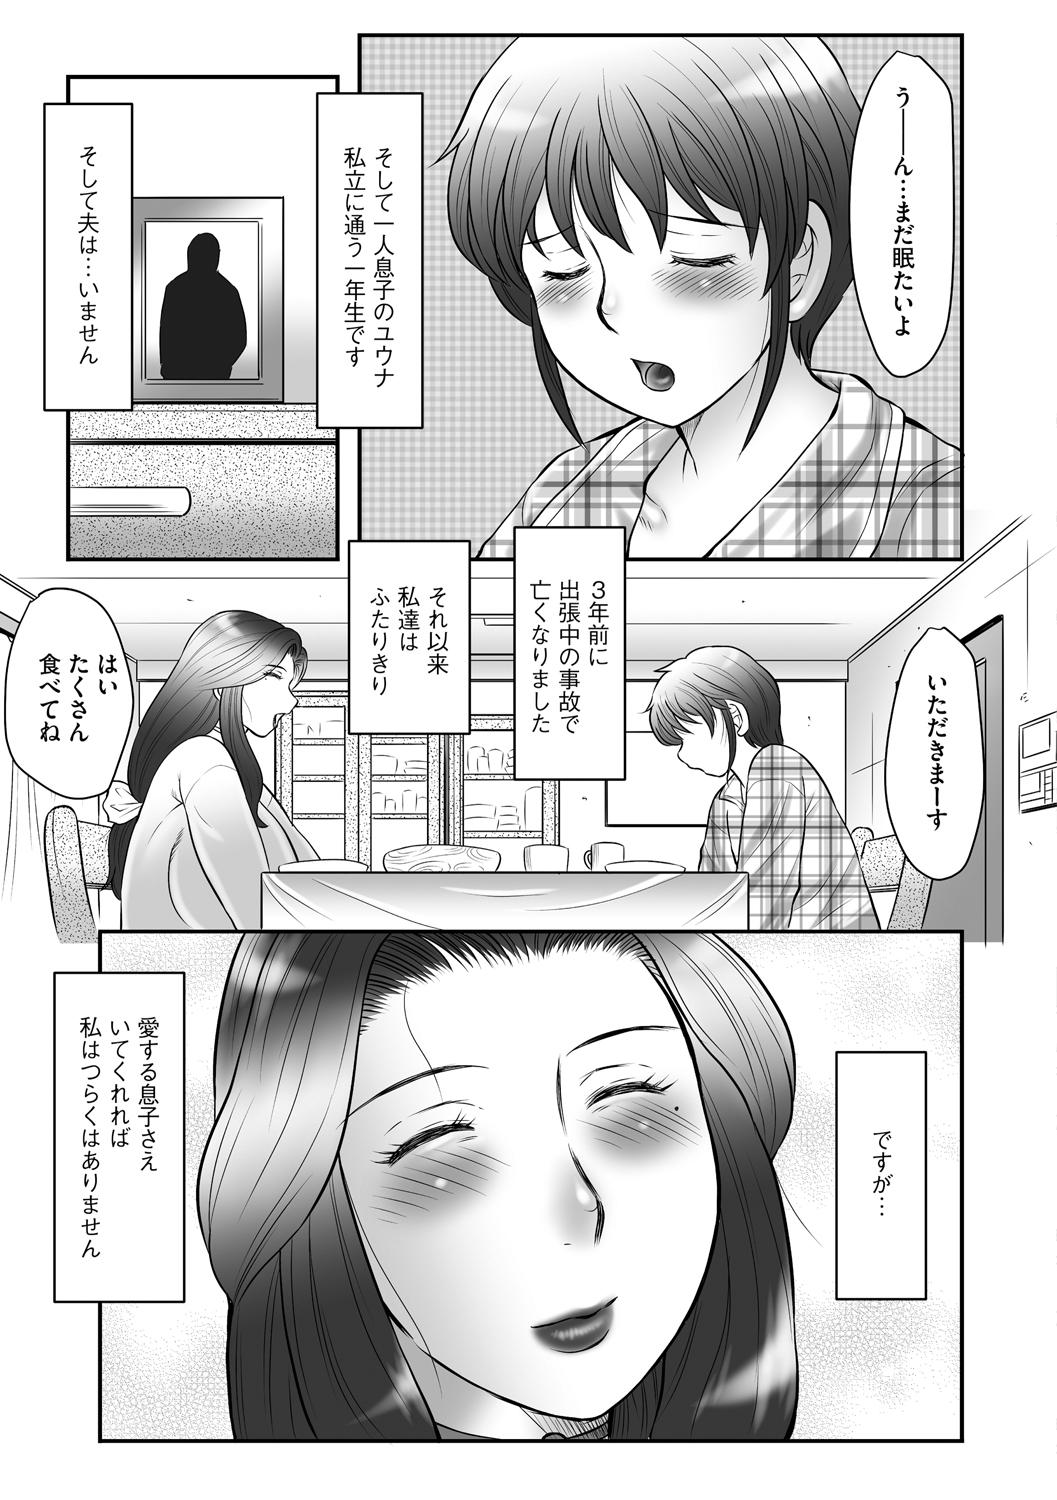 Boshi no Susume - The advice of the mother and child Ch. 1 4